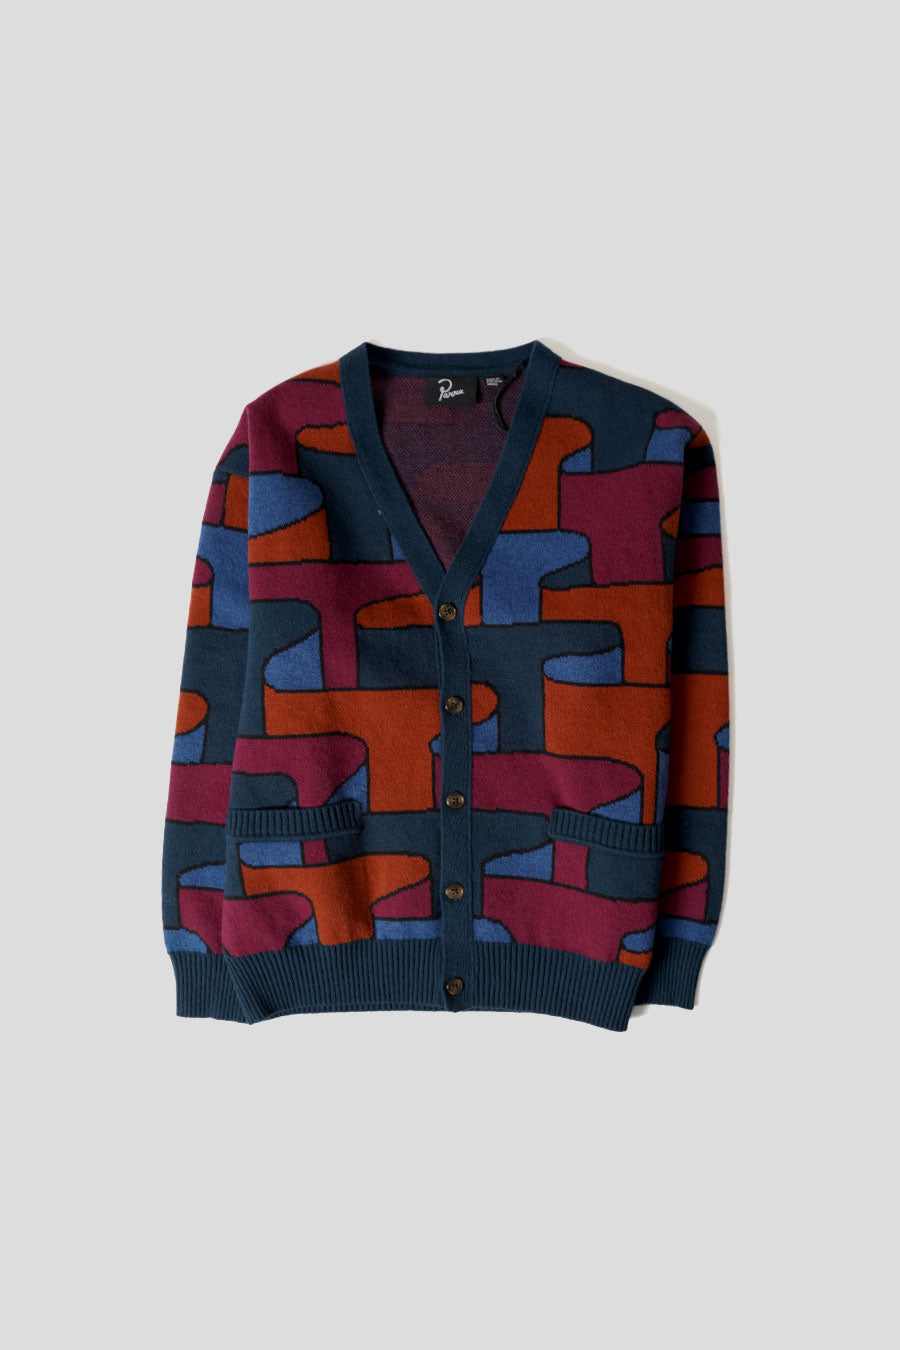 BY PARRA - RED, BLUE AND ORANGE KNITTED CARDIGAN - LE LABO STORE